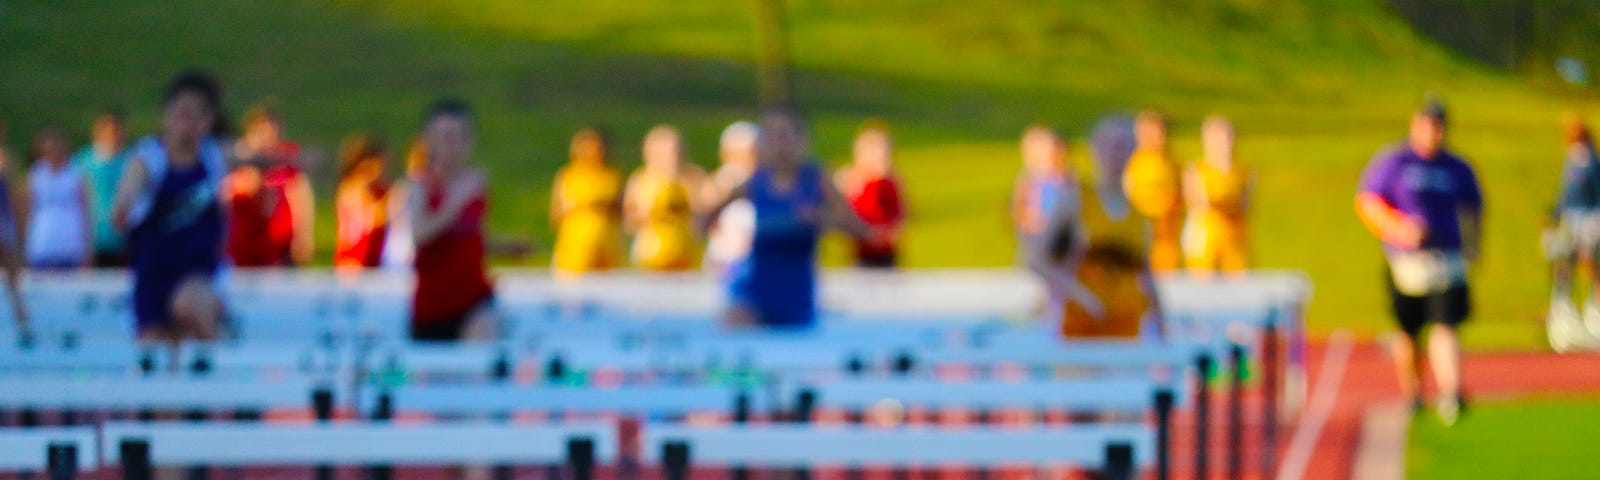 Adolescent children in colorful pennies run on a track with hurdles. The hurdles are in the foreground on a red/brown track and the kids are positioned toward the back of the photo, out of focus. They were pennies that are blue, yellow, red, and purple, and they appear to be running toward the camera.